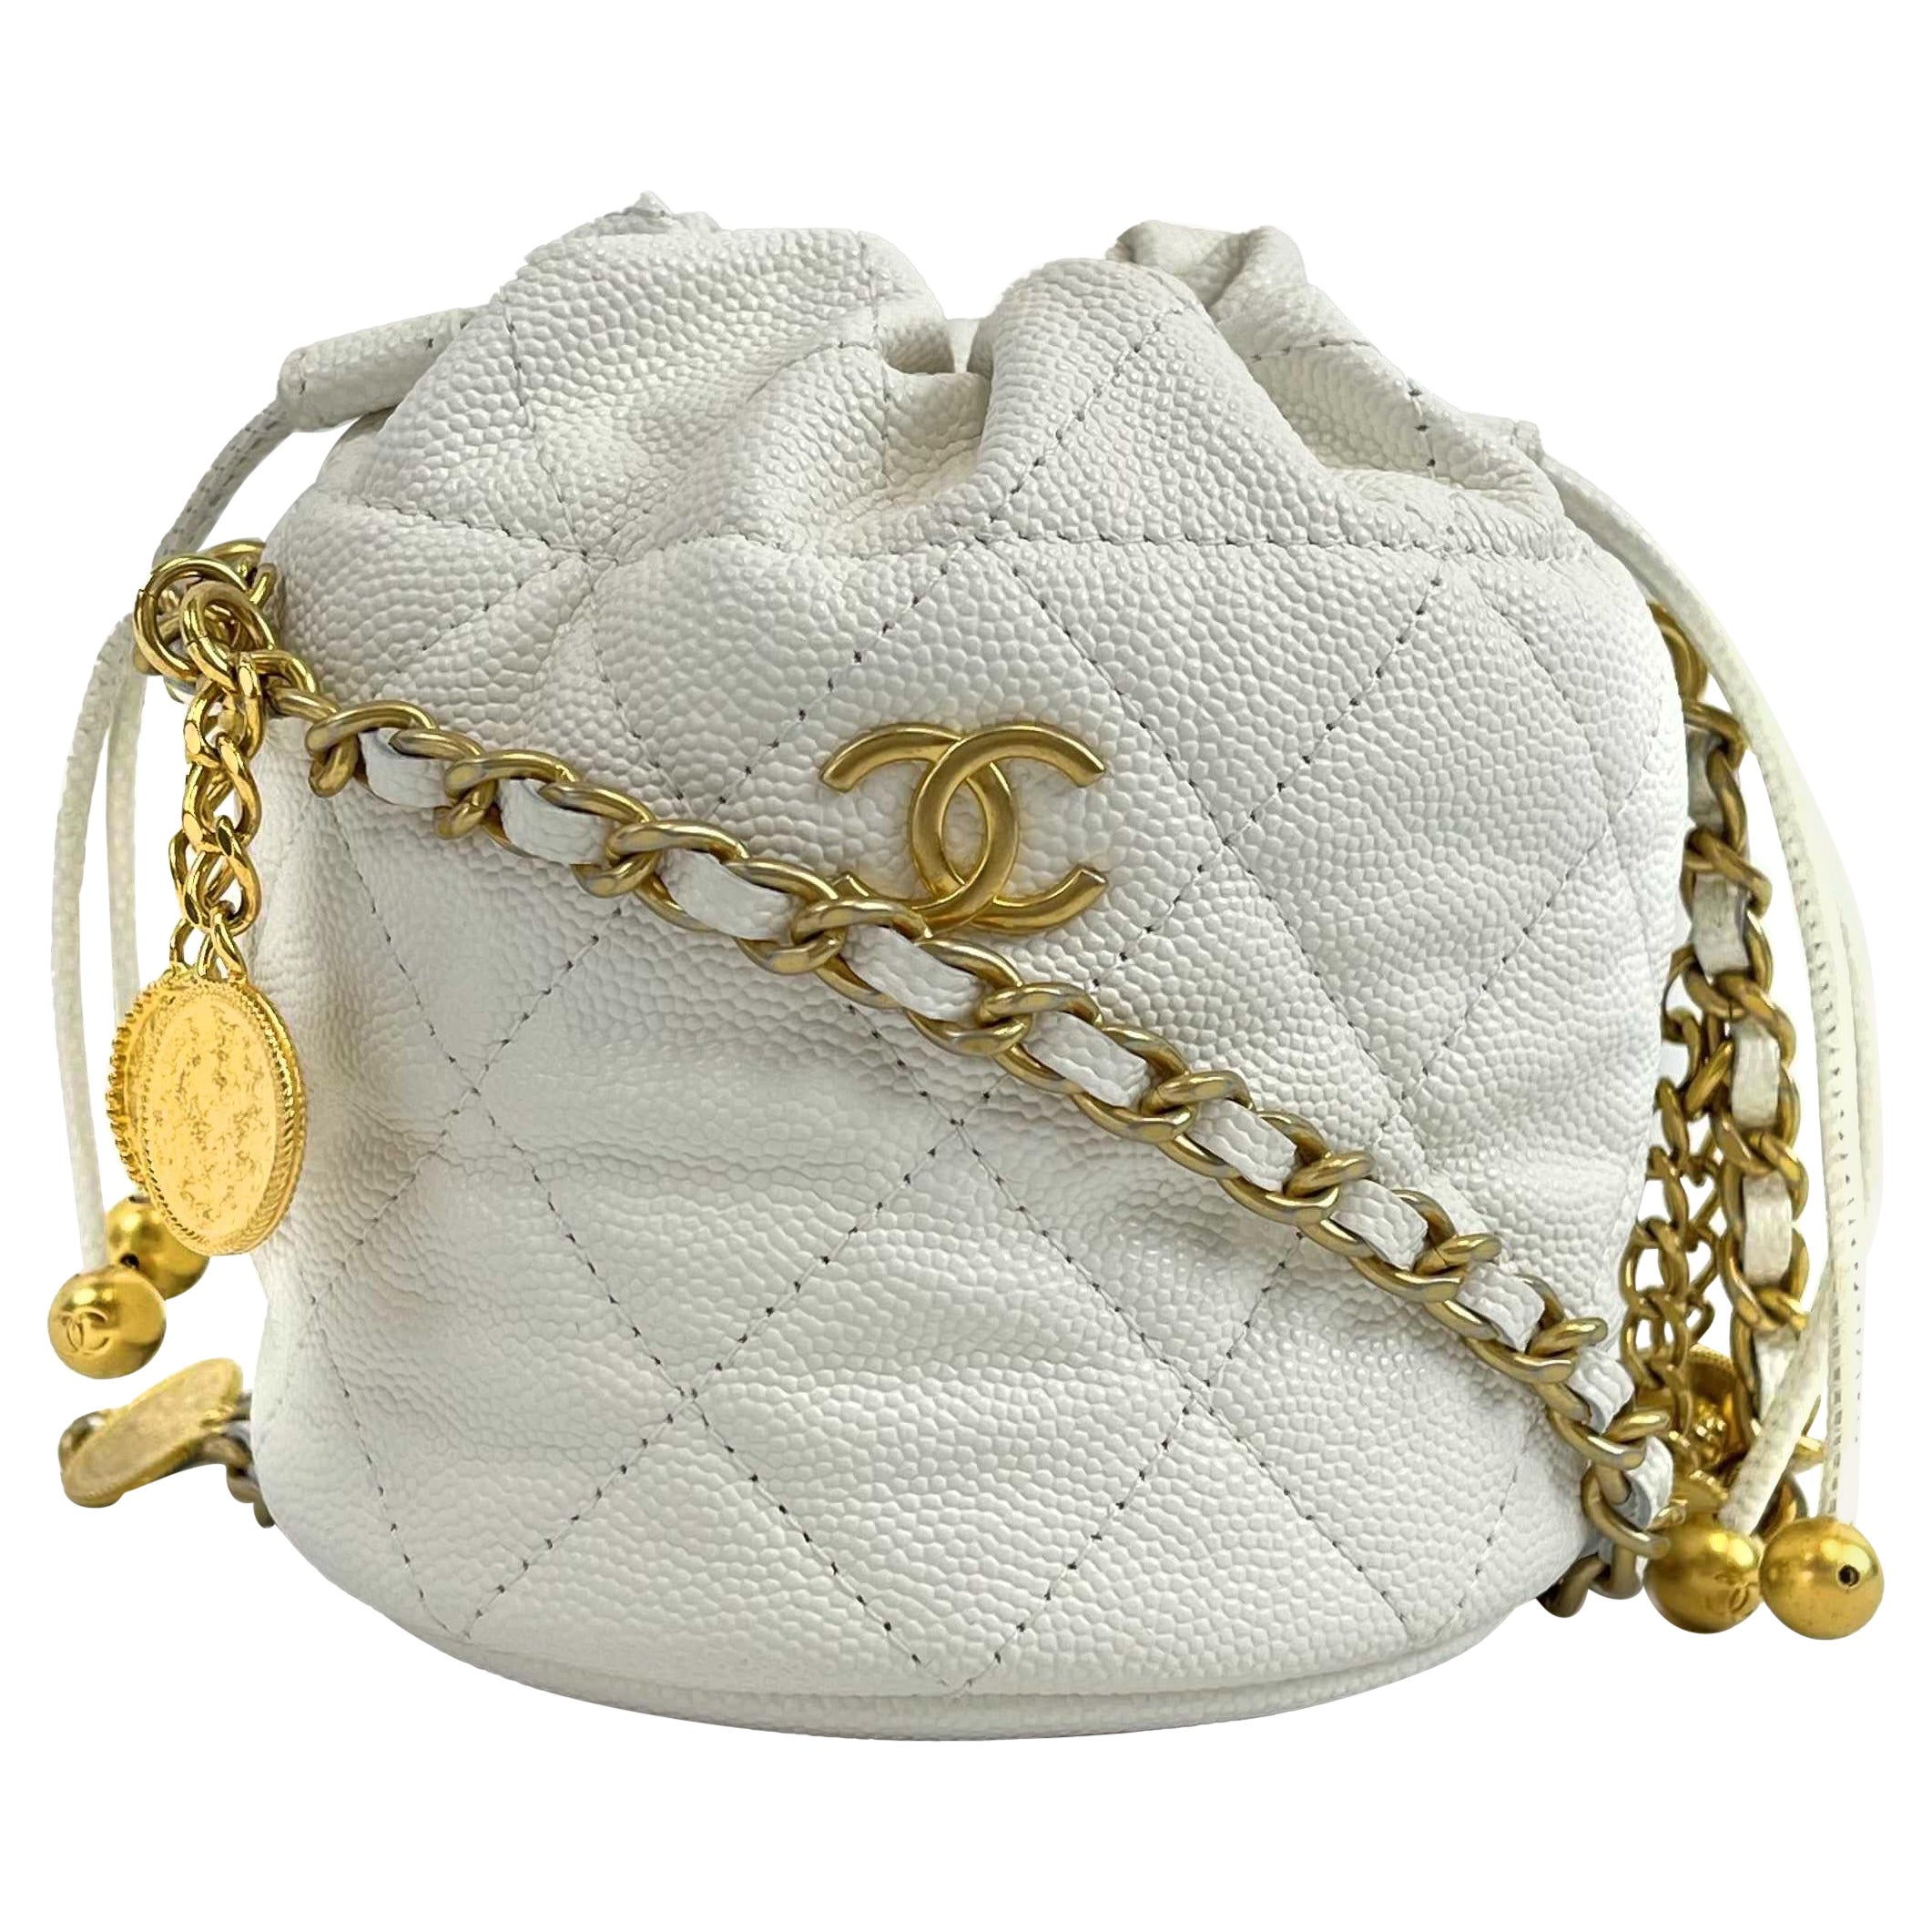 CHANEL - NEW Mini Bucket Bag - White Caviar Leather / Gold 10 Coins CC Crossbody For Sale